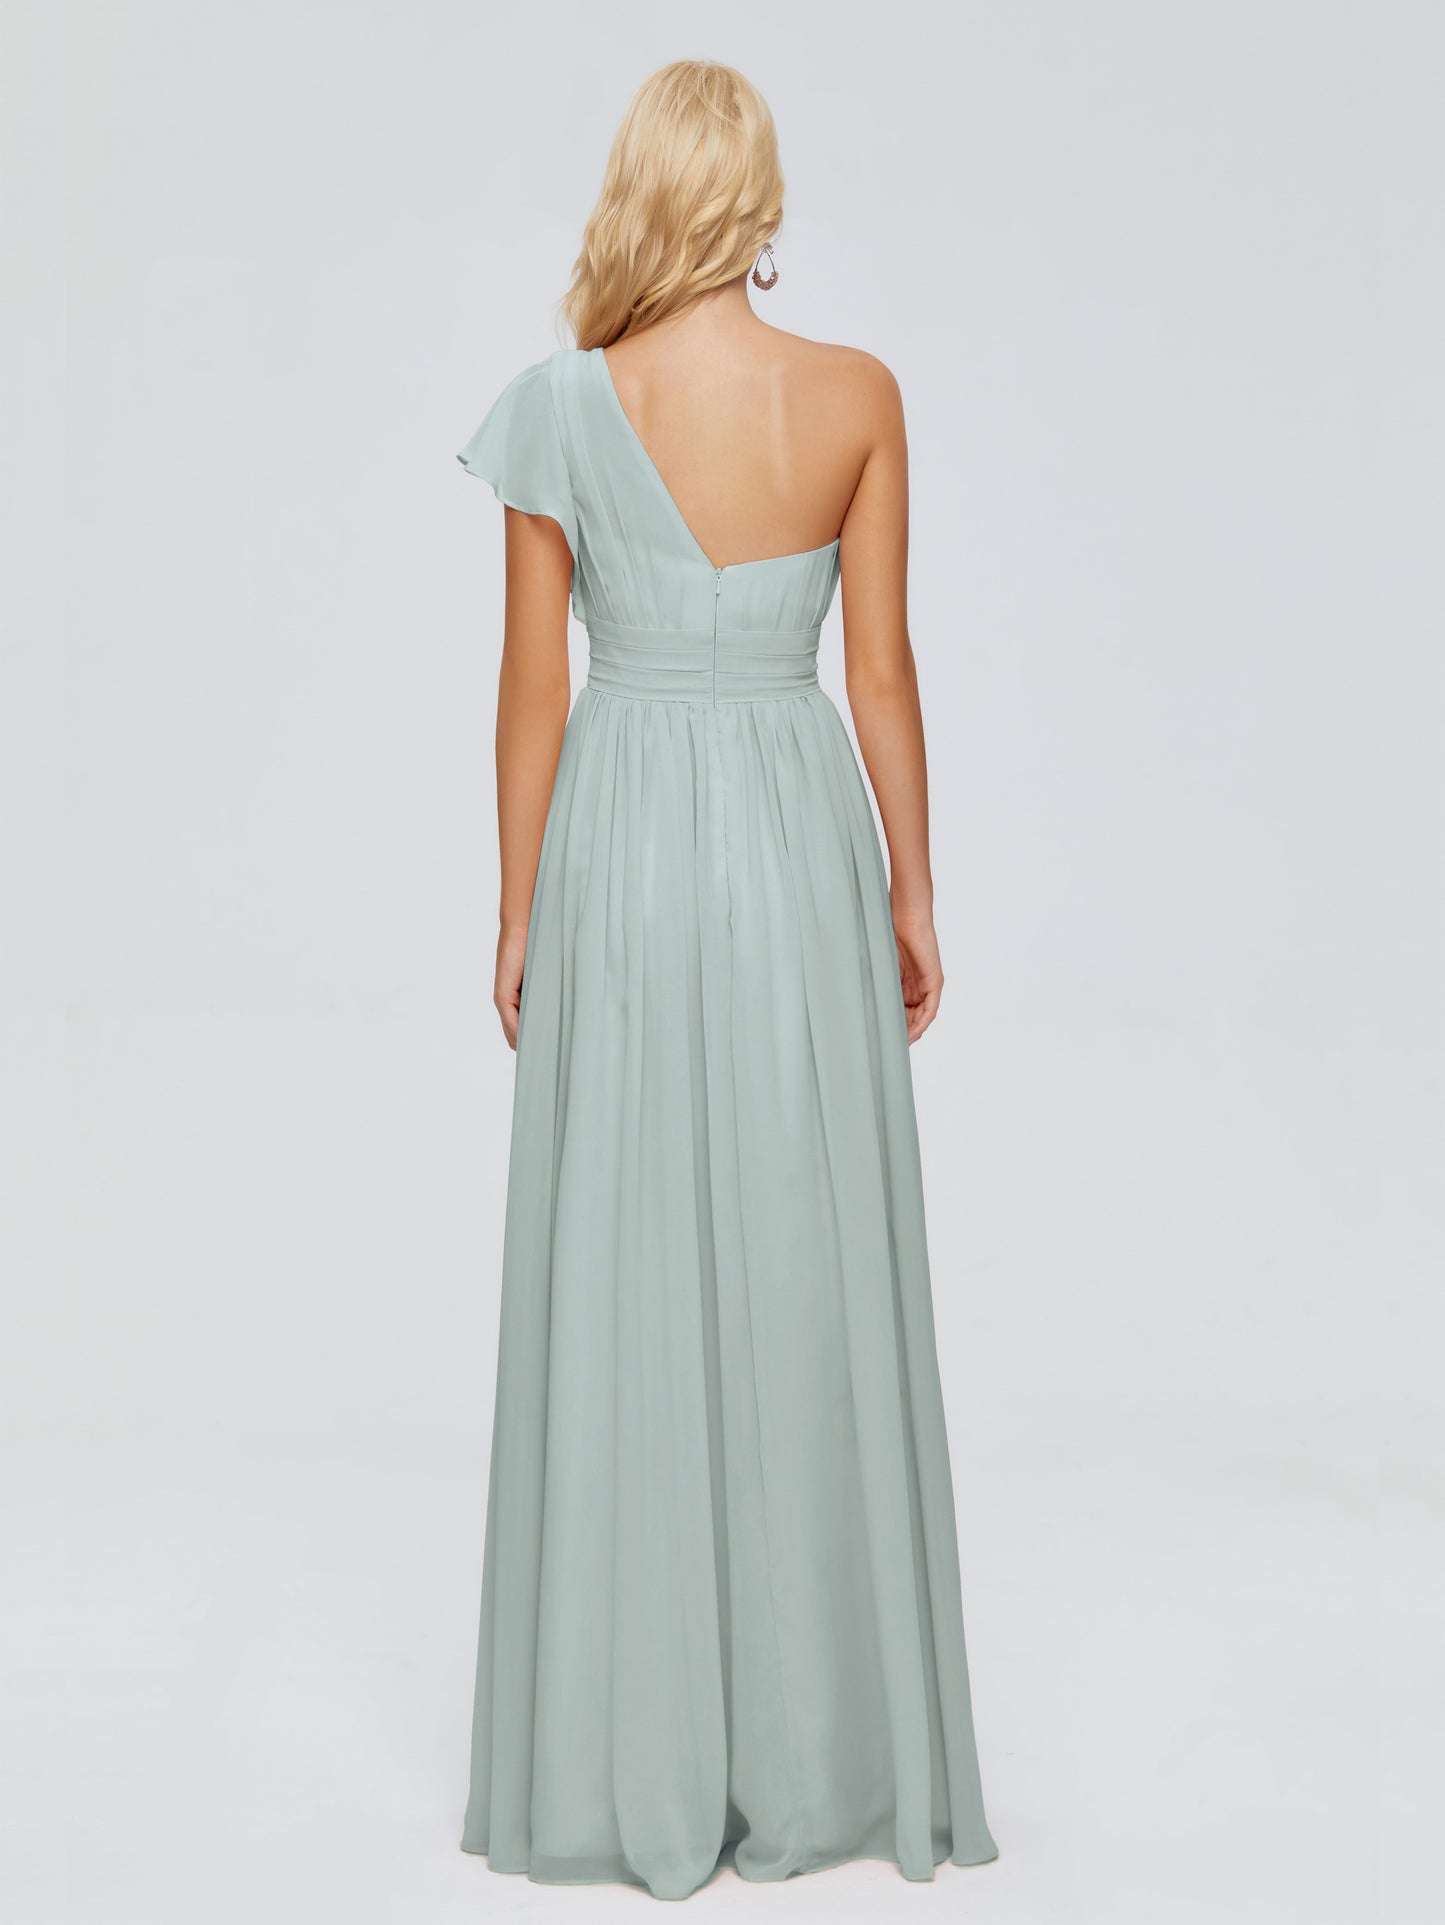 Rylee Gorgeous One Shoulder Pleated Chiffon Bridesmaid Dresses